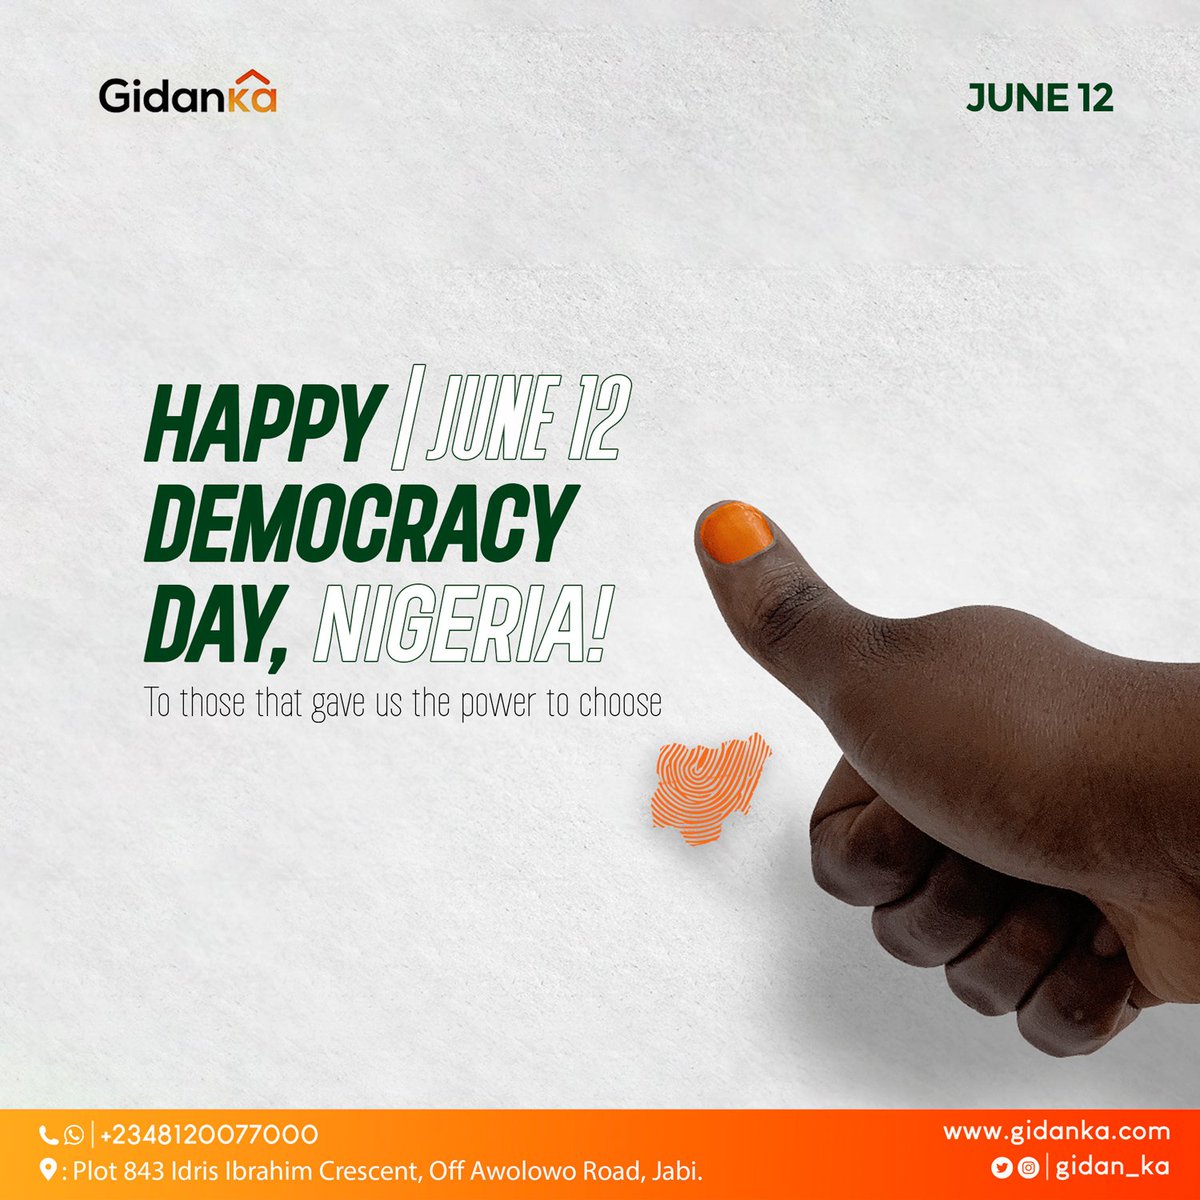 We wish all fellow Nigerians a 'Happy Democracy Day'. Let's celebrate our Nigeria today, tomorrow and everyday. 

#democracyday #smartresidences #gidanka #servicedapartment #abujabusiness #June12